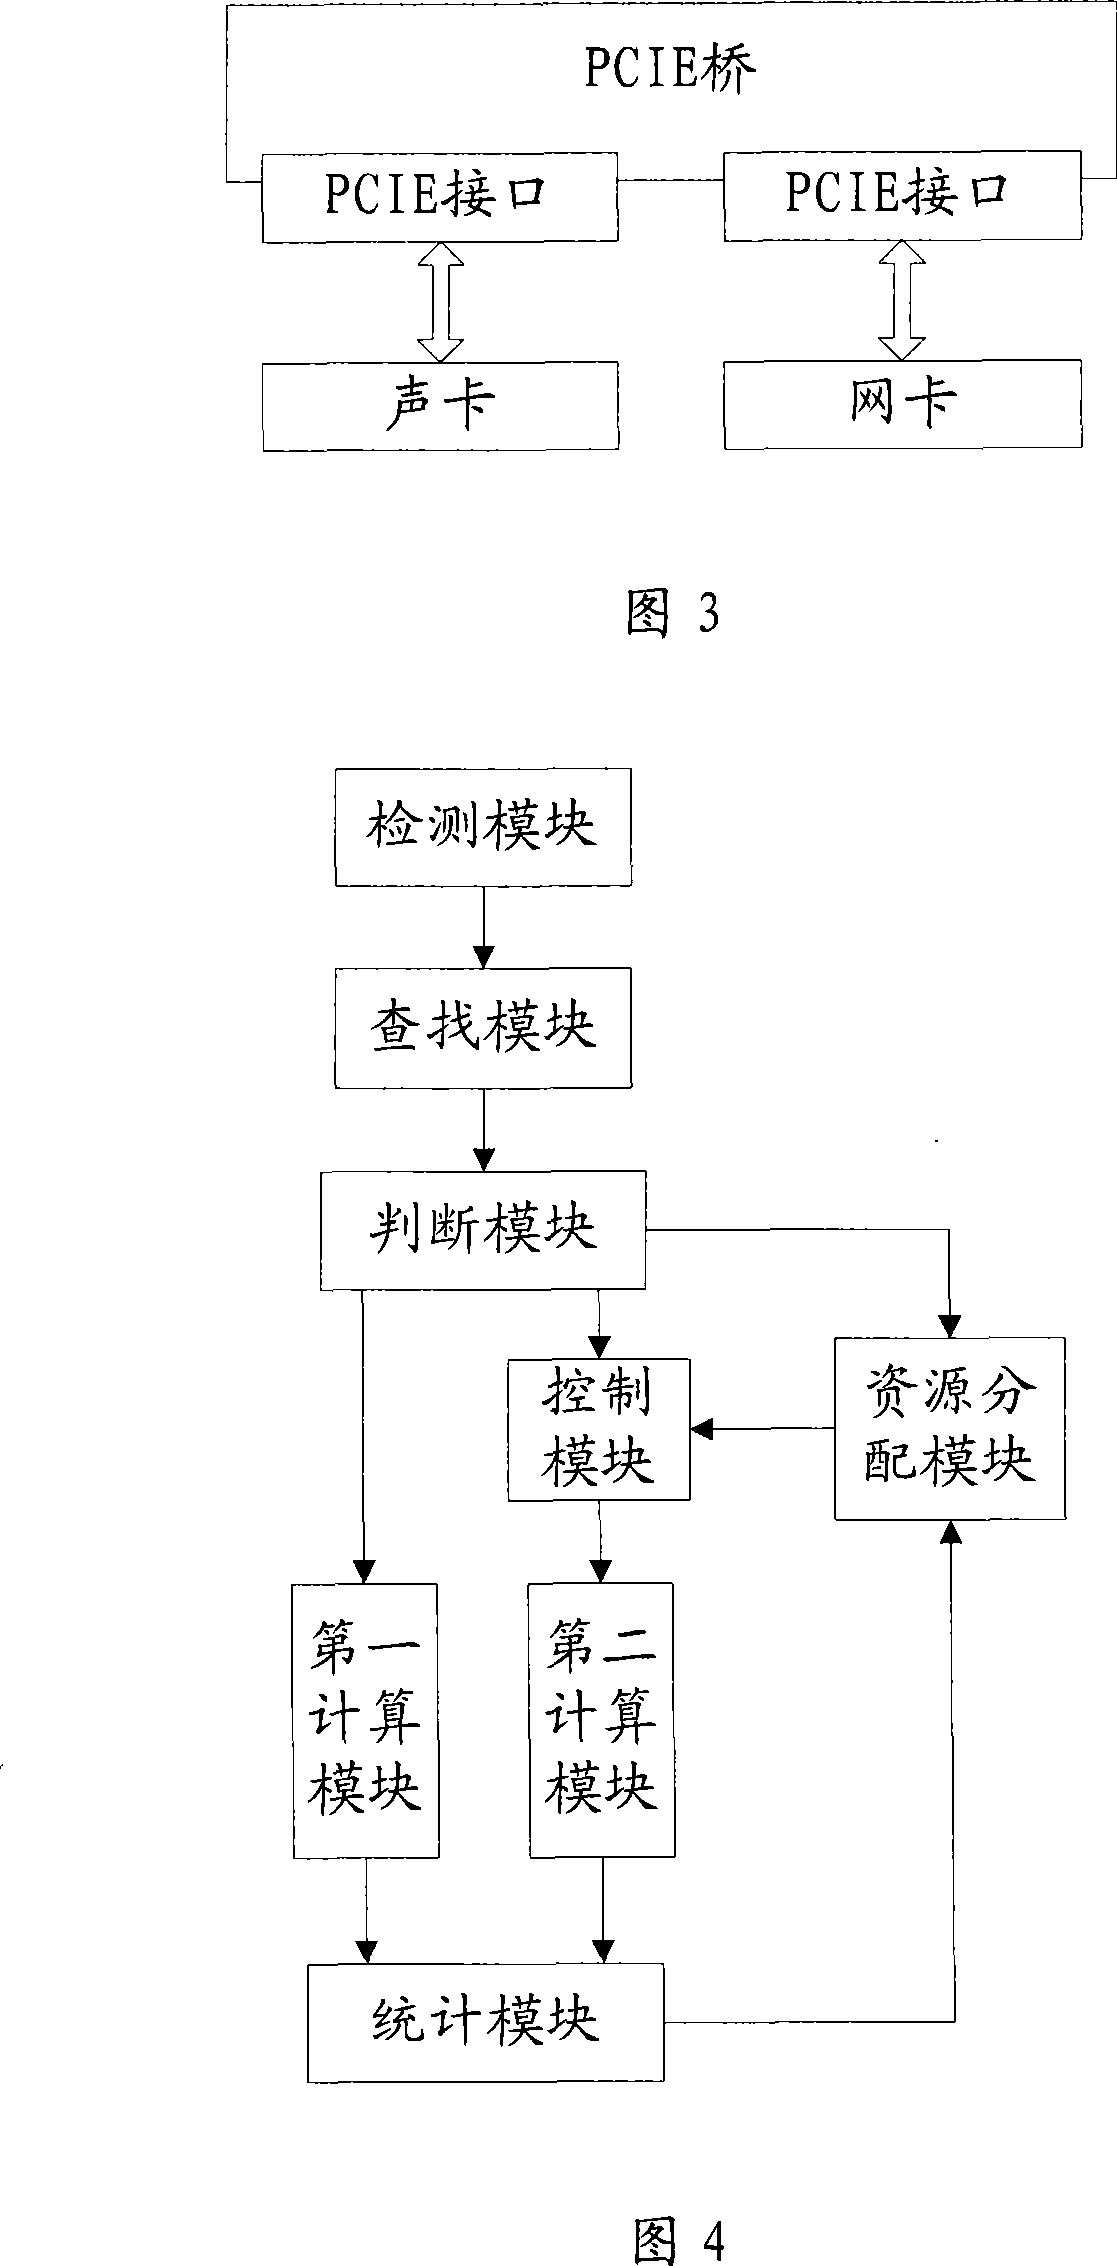 Method and apparatus for distributing resource of hot-plug bus interface